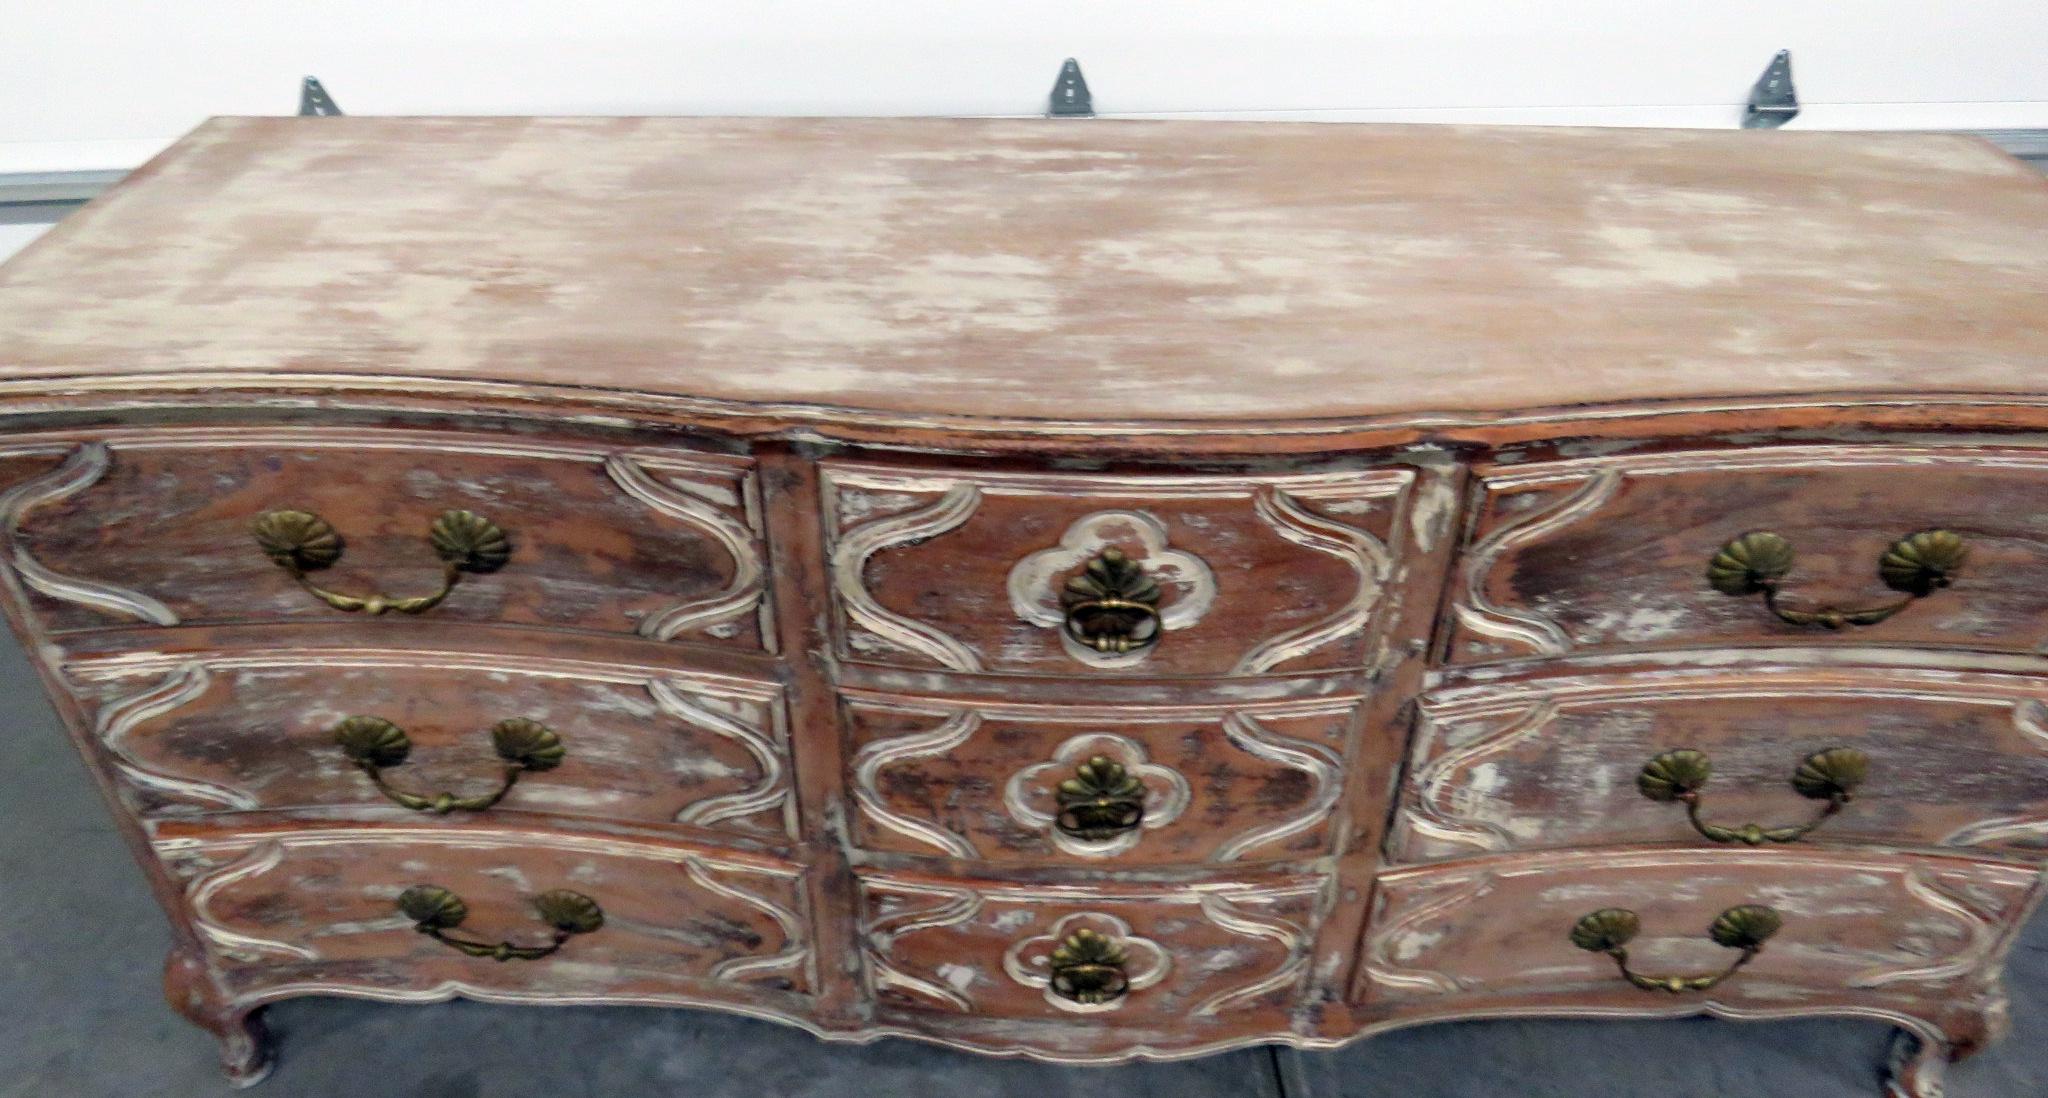 20th Century Signed Auffray Country French Louis XV Distressed Painted Triple Dresser